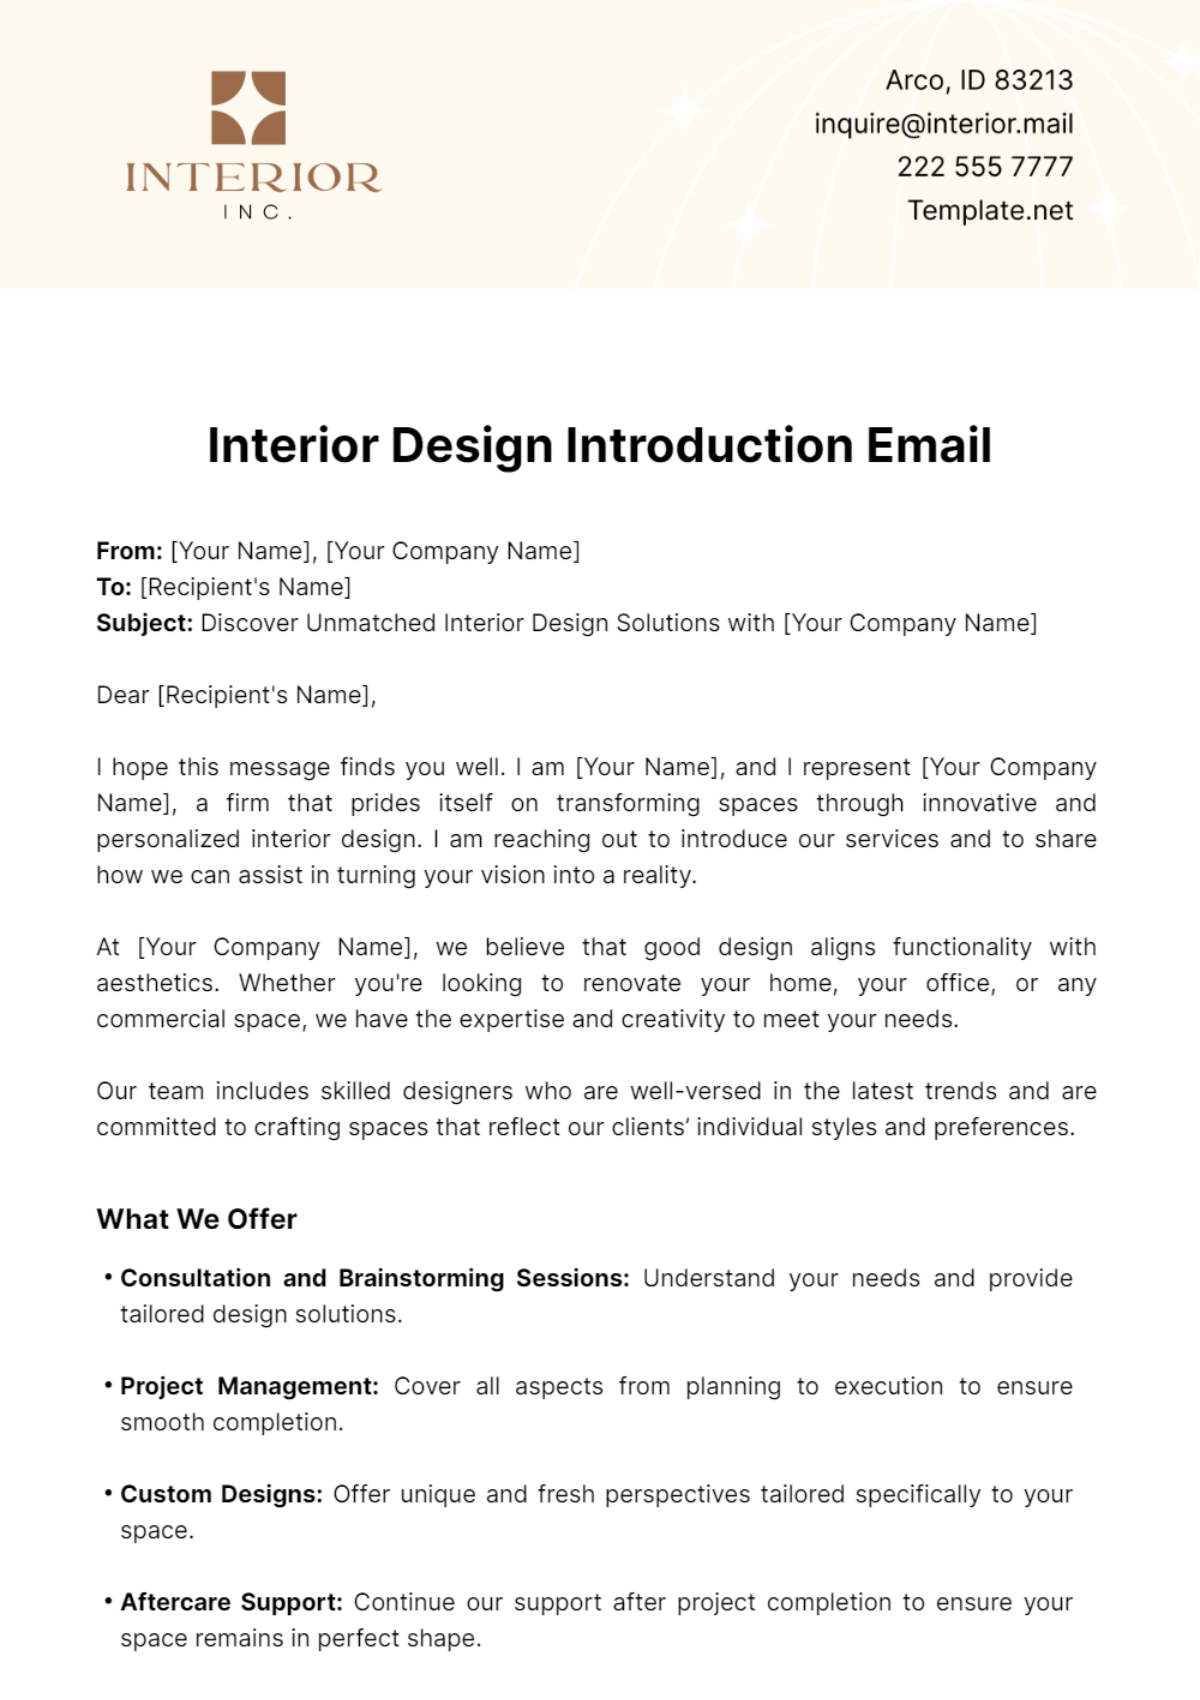 Free Interior Design Introduction Email Template